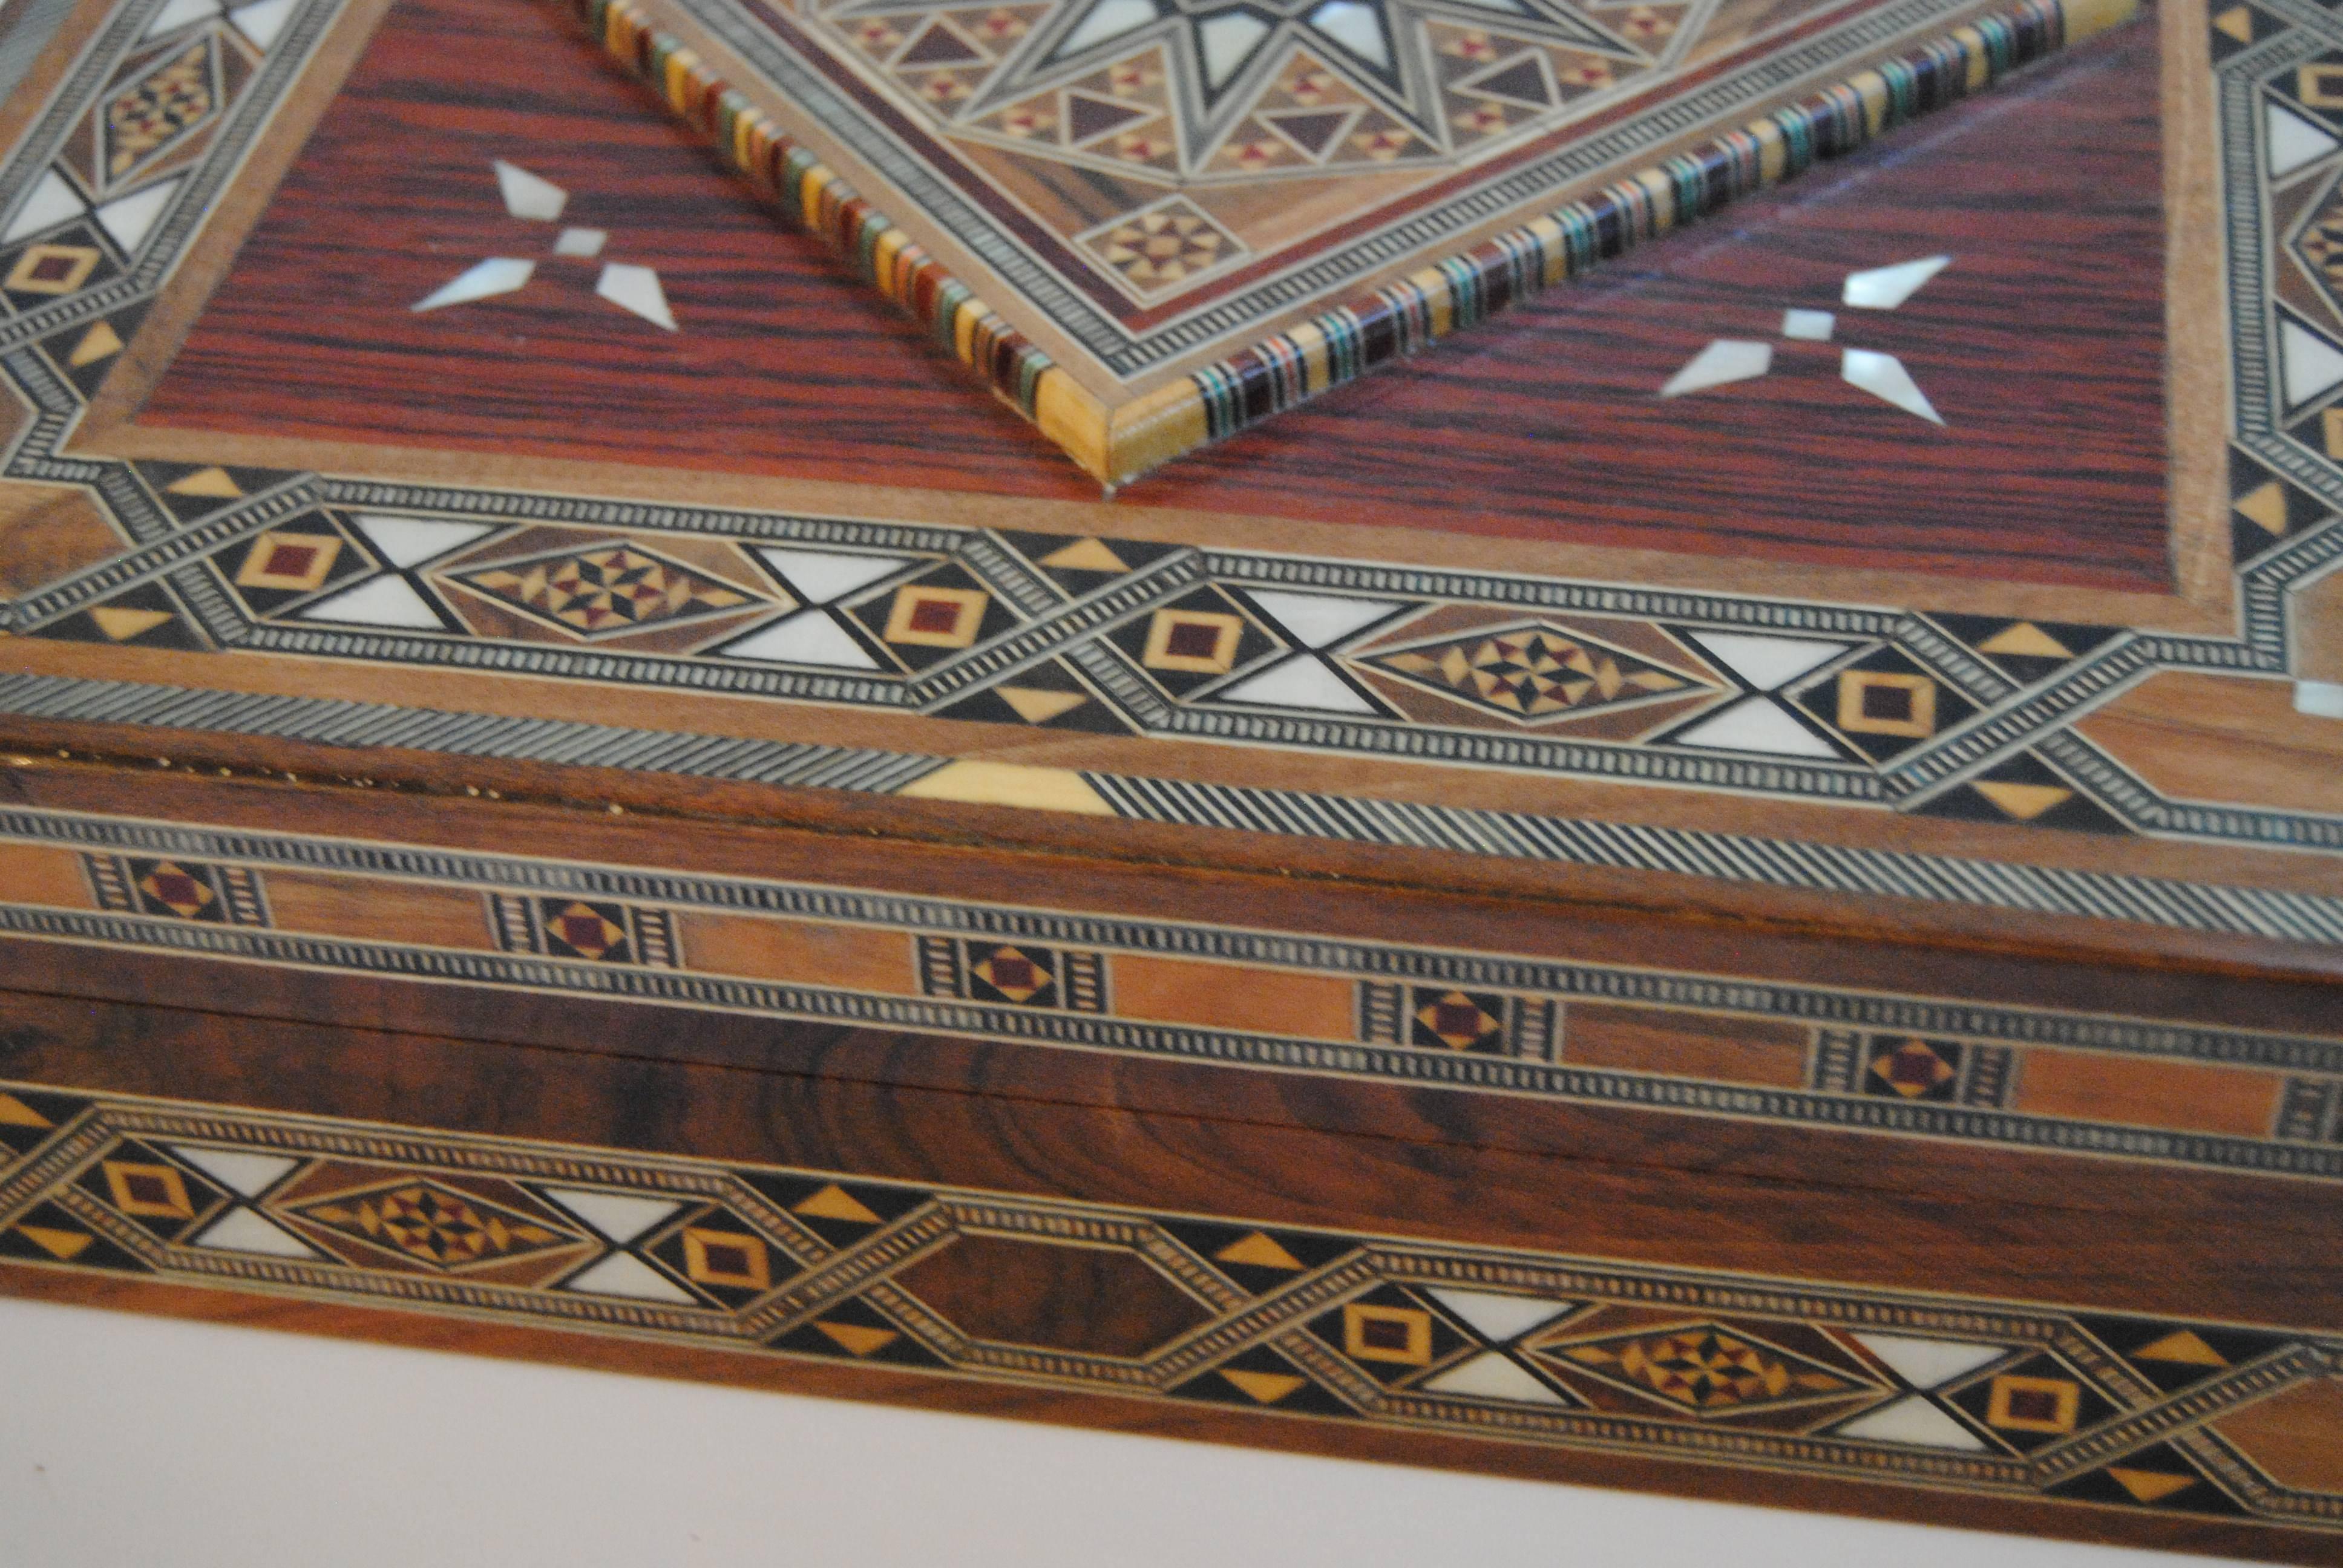 Syrian Walnut Wood Box Inlaid with Mother-of-Pearl, Cream Leather Lining 1